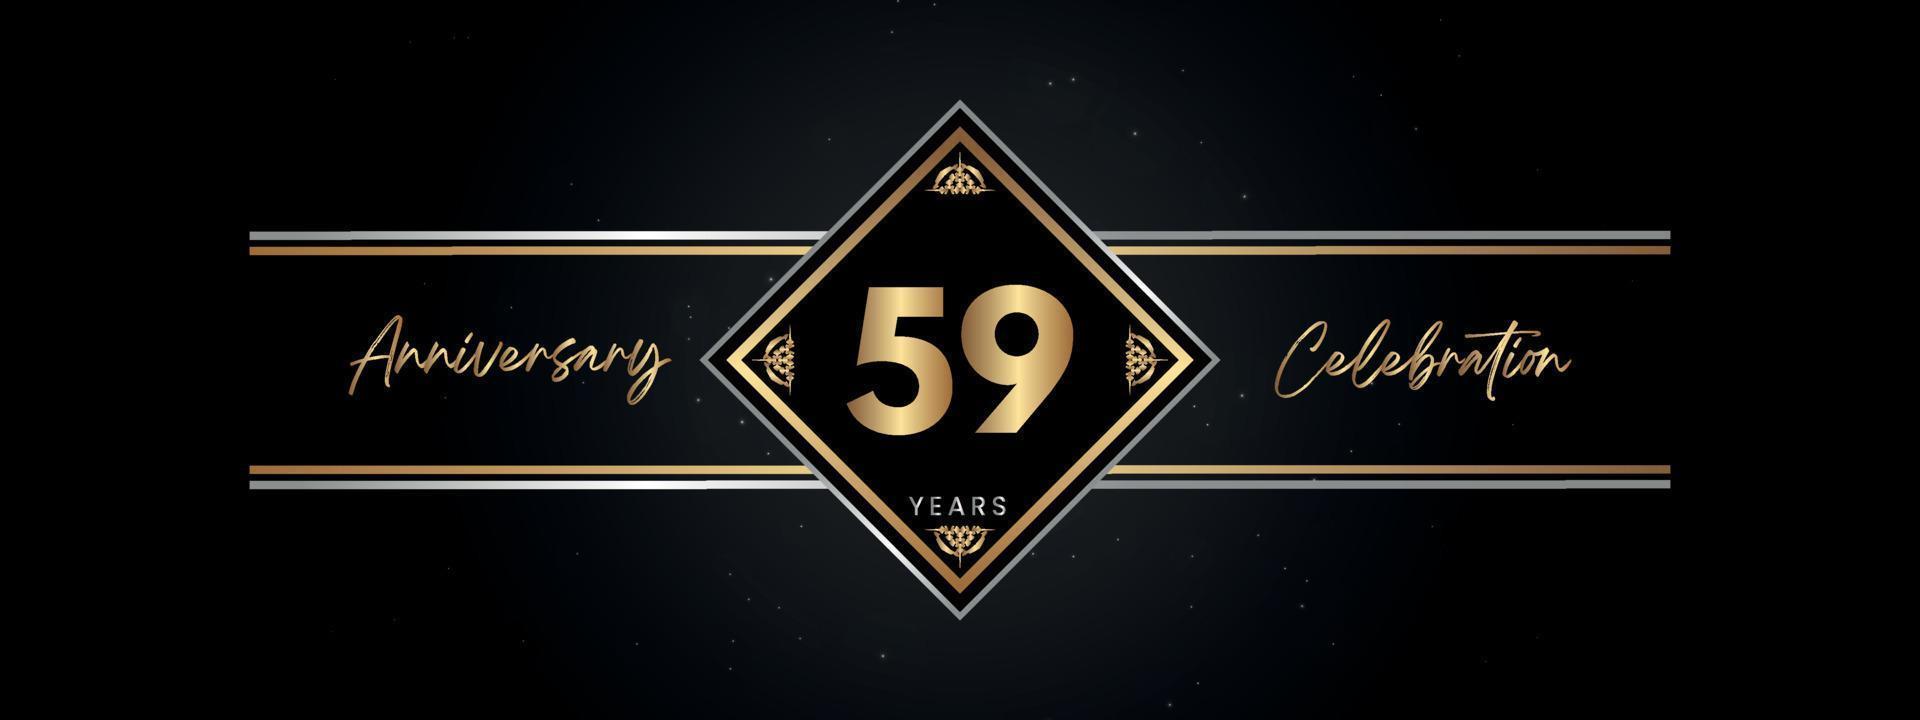 59 years anniversary golden color with decorative frame isolated on black background for anniversary celebration event, birthday party, brochure, greeting card. 59 Year Anniversary Template Design vector